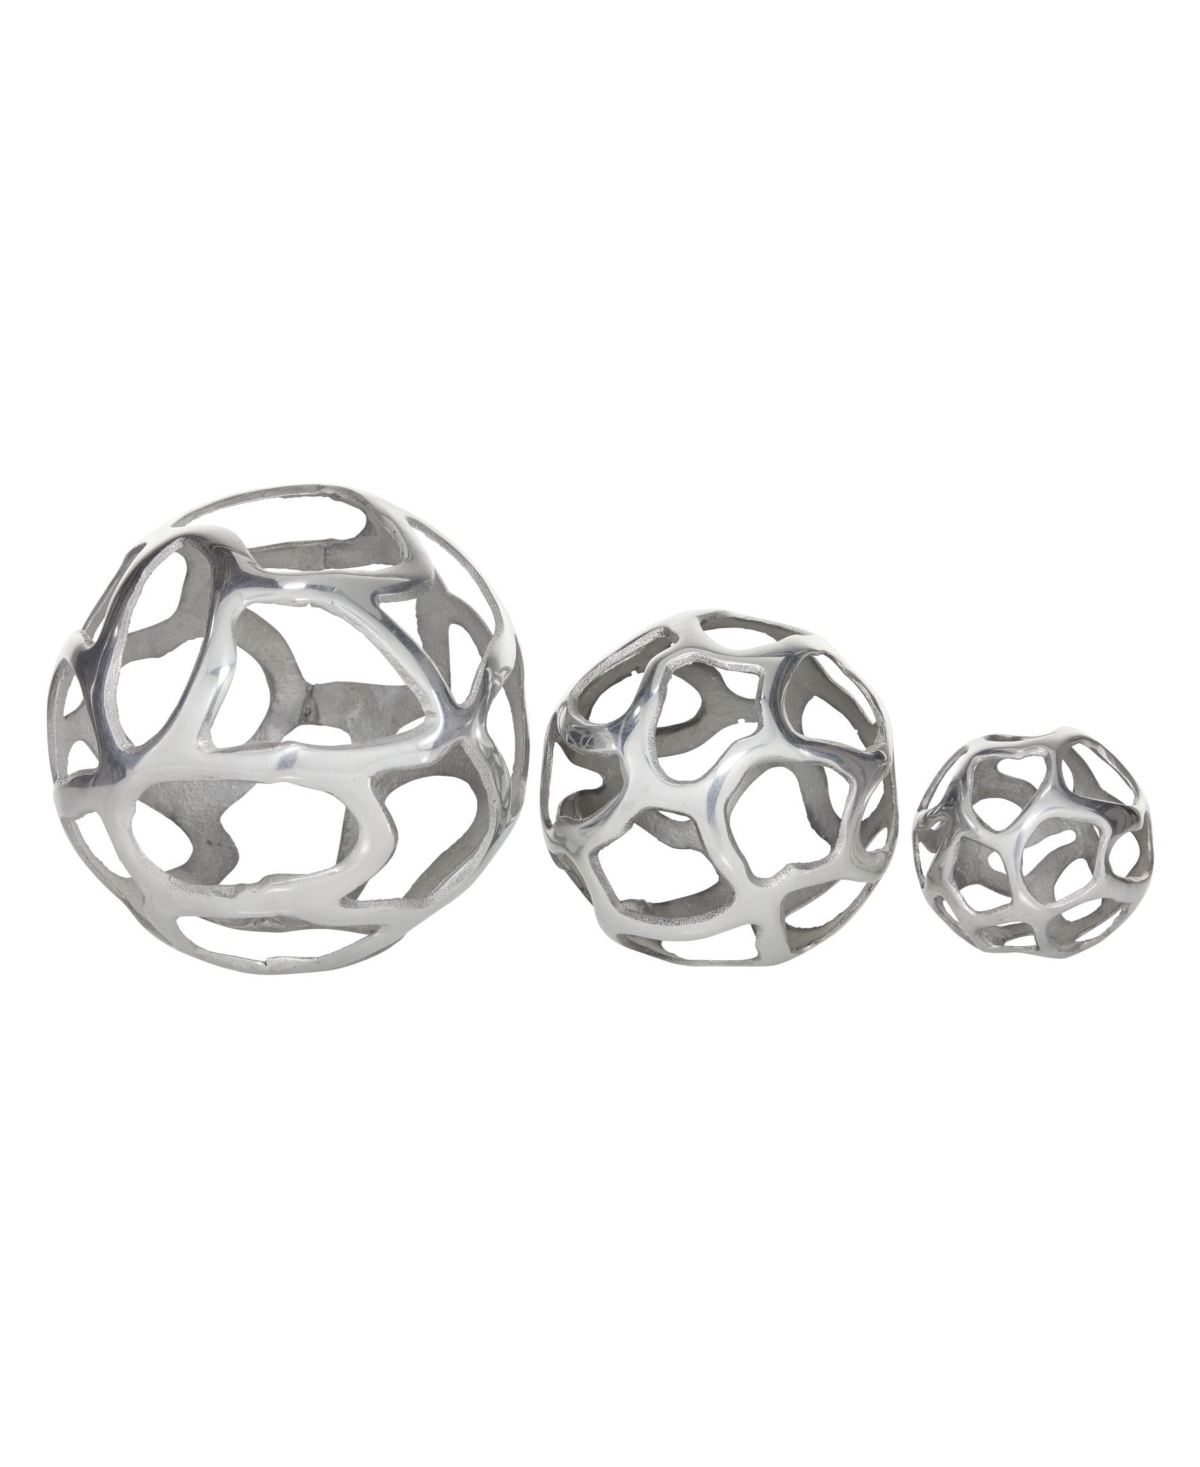 Rosemary Lane Contemporary Sculpture, Set Of 3 In Silver-tone